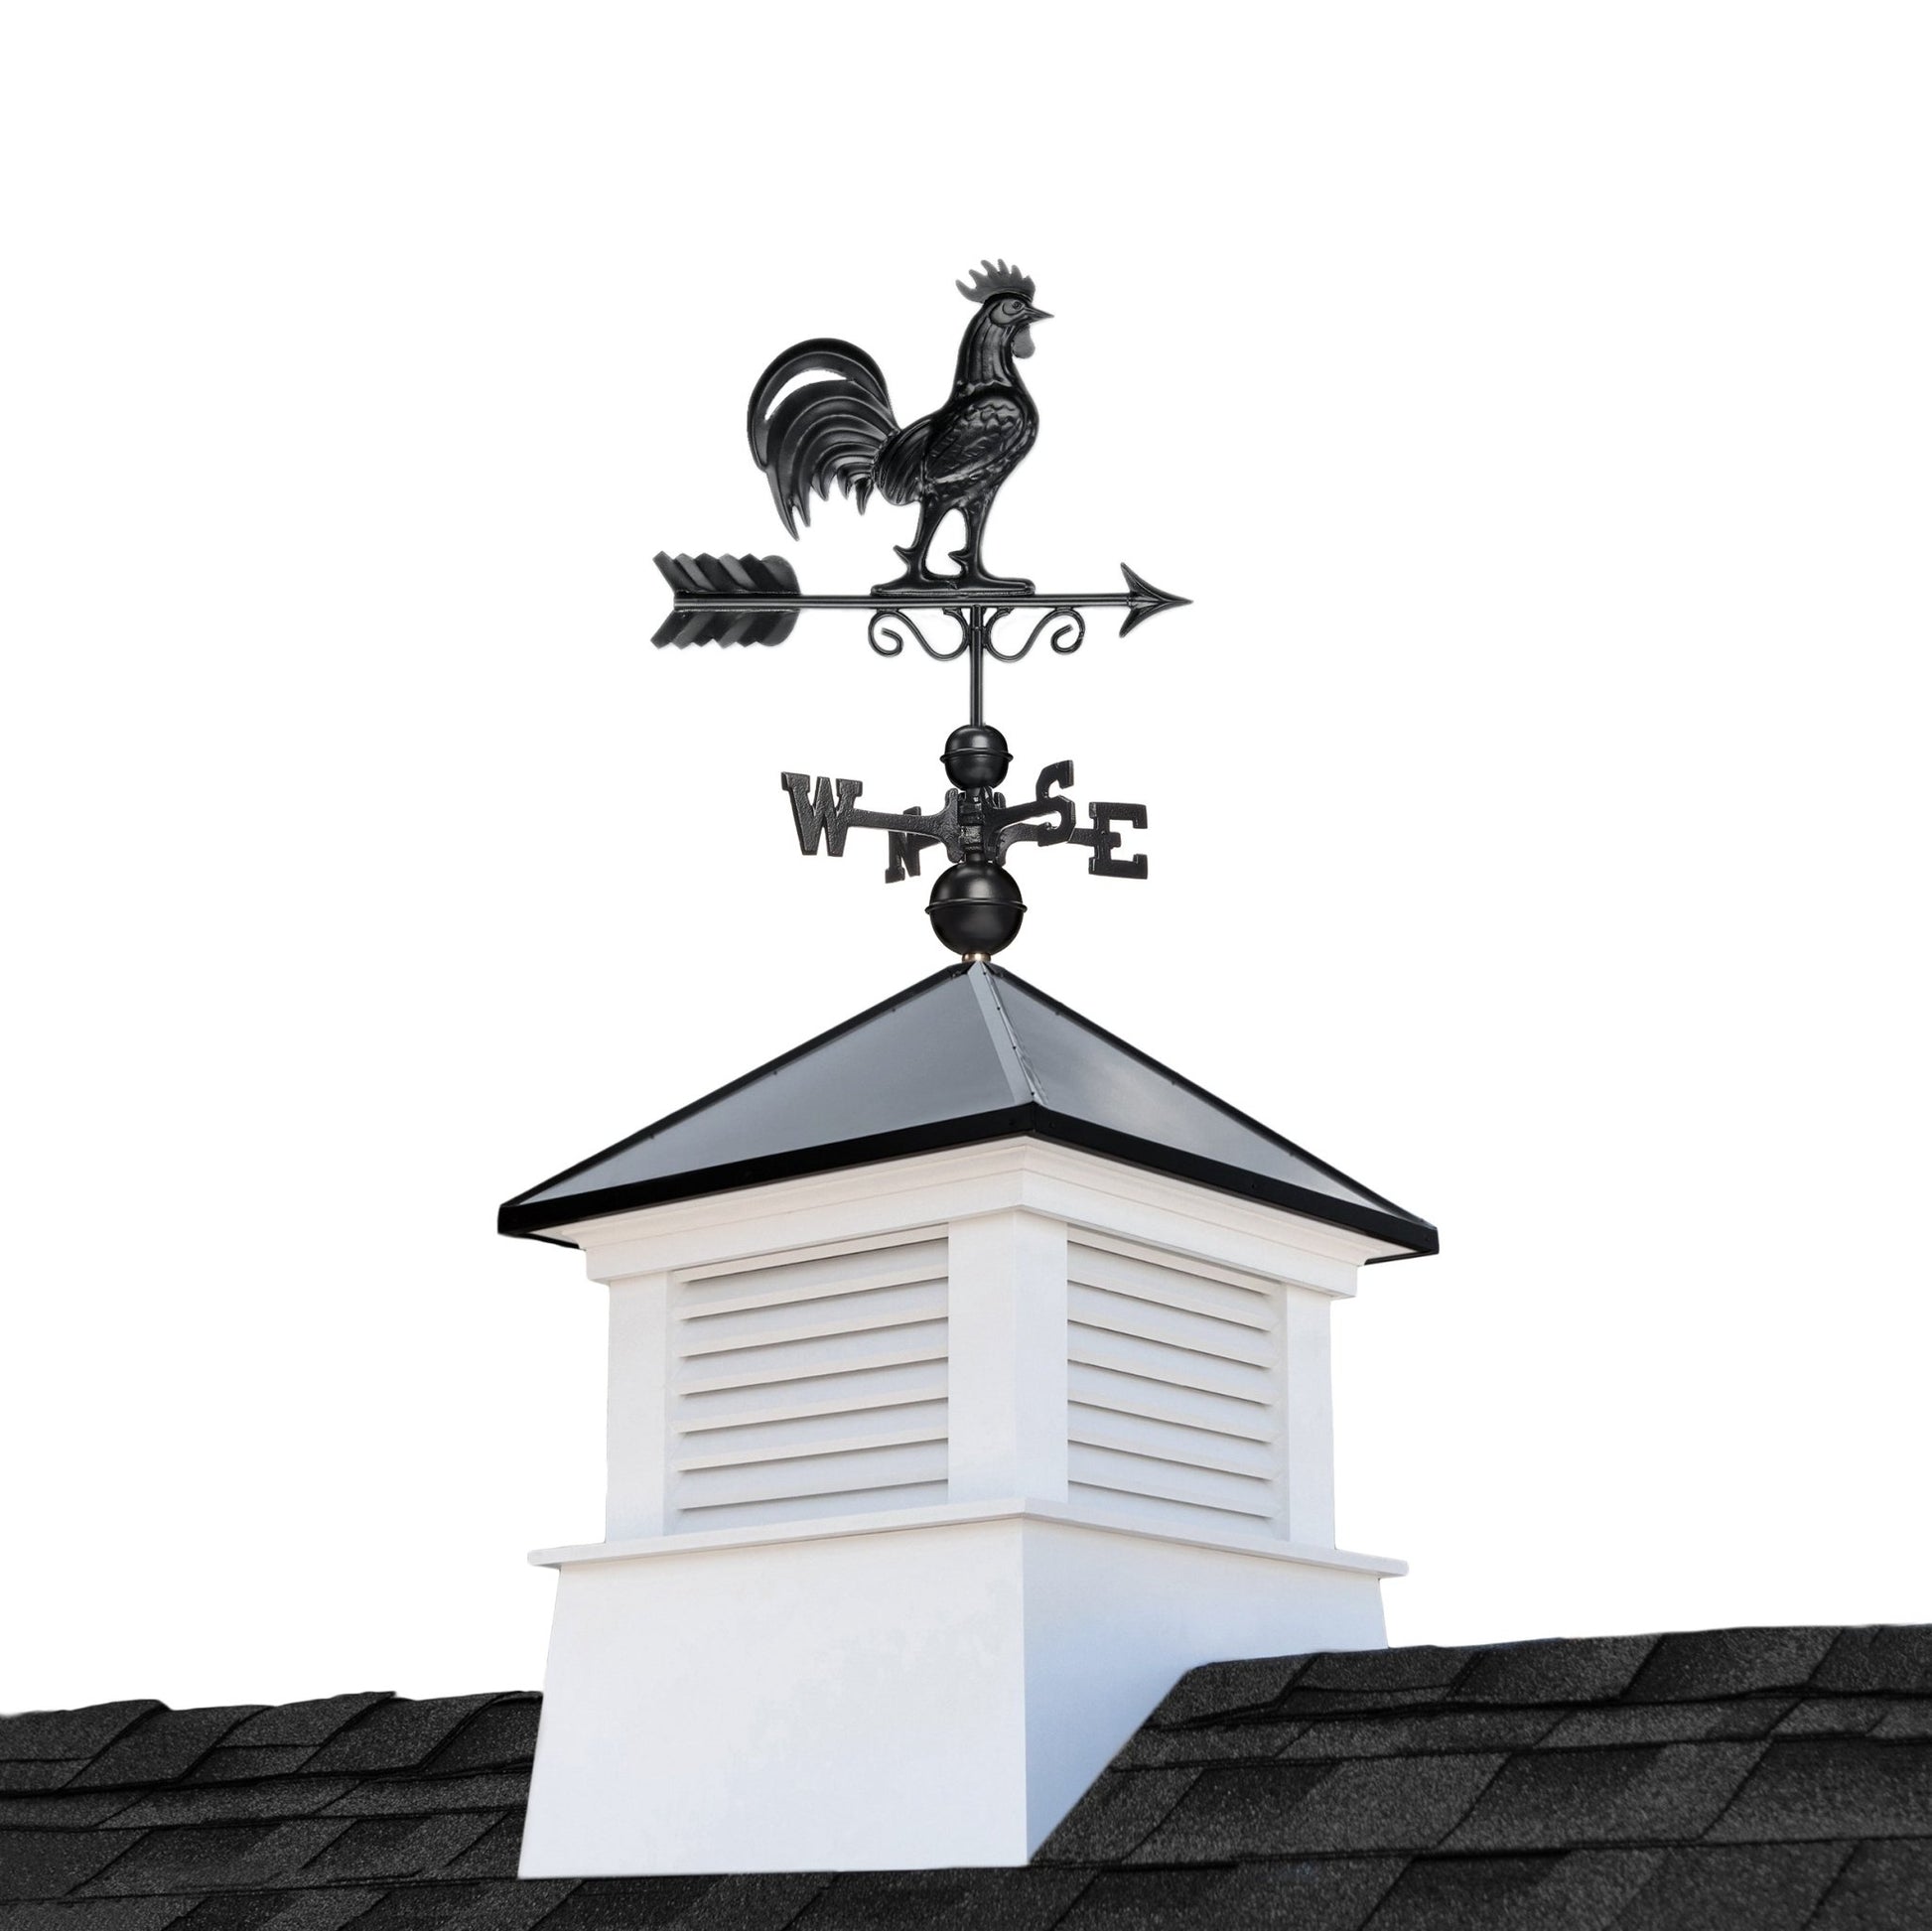 26" Square Manchester Vinyl Cupola with Black Aluminum roof and Black Aluminum Rooster Weathervane - Good Directions